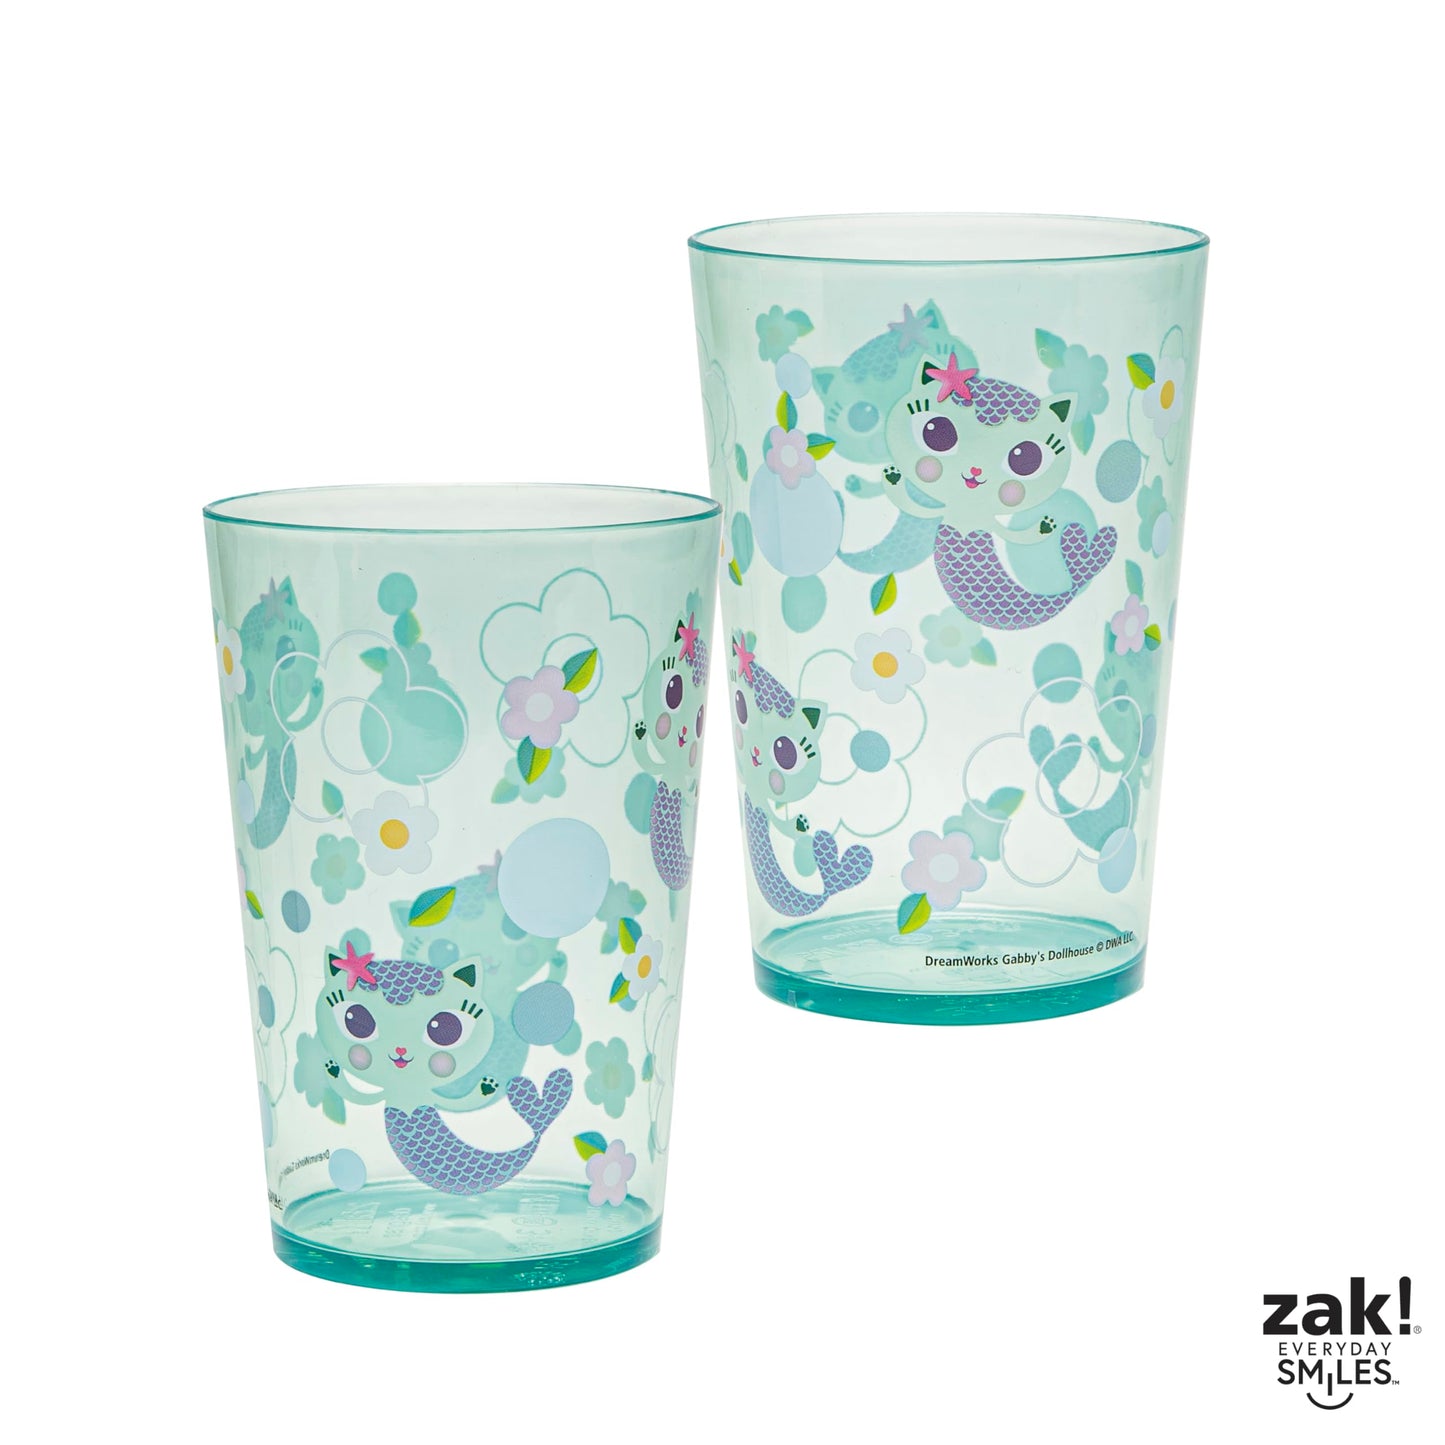 Zak Designs Bluey Nesting Tumbler Set Includes Durable Plastic Cups with Variety Artwork, Fun Drinkware is Perfect for Kids (14.5 oz, 4-Pack, Non-BPA)